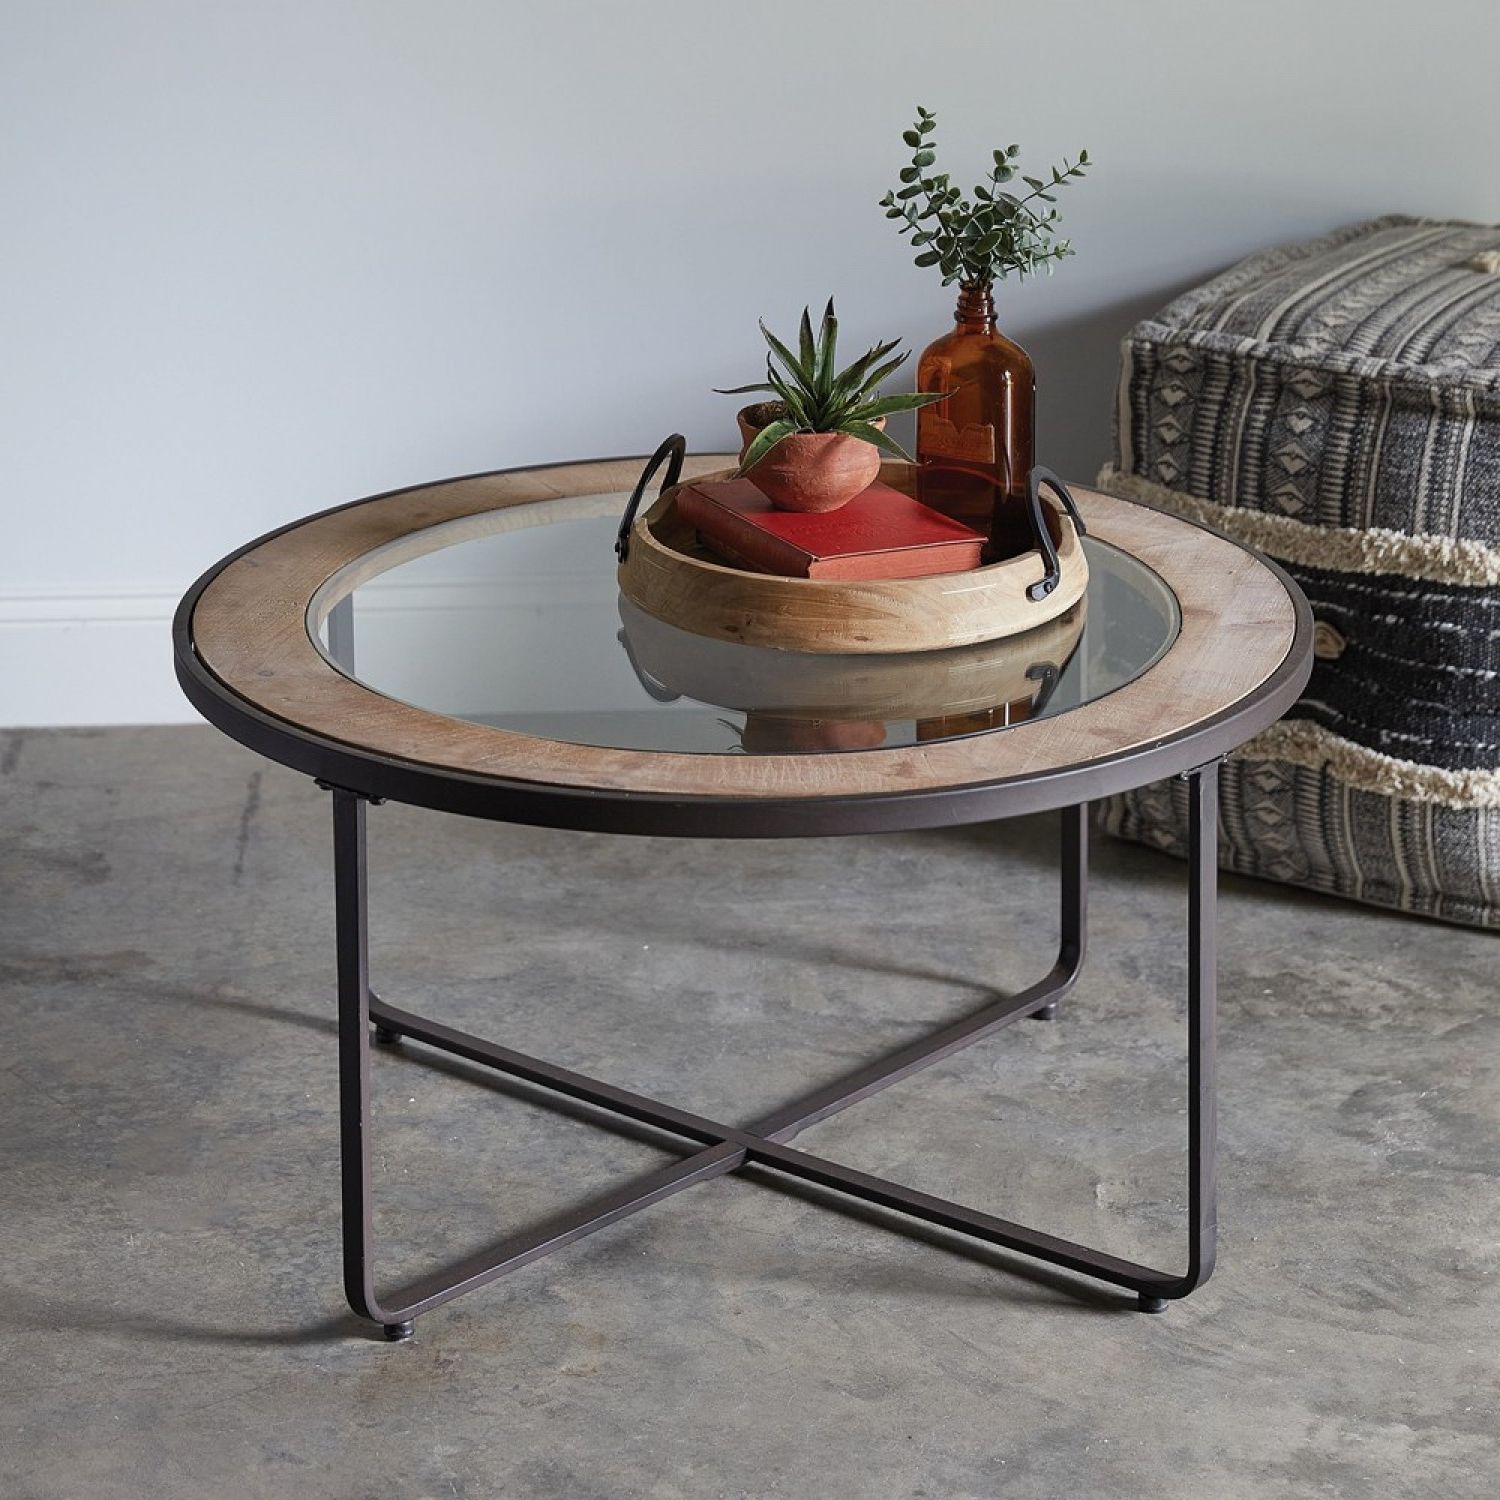 Small Industrial Round Coffee Table With Wood & Glass Top Throughout Current Round Industrial Coffee Tables (View 18 of 20)